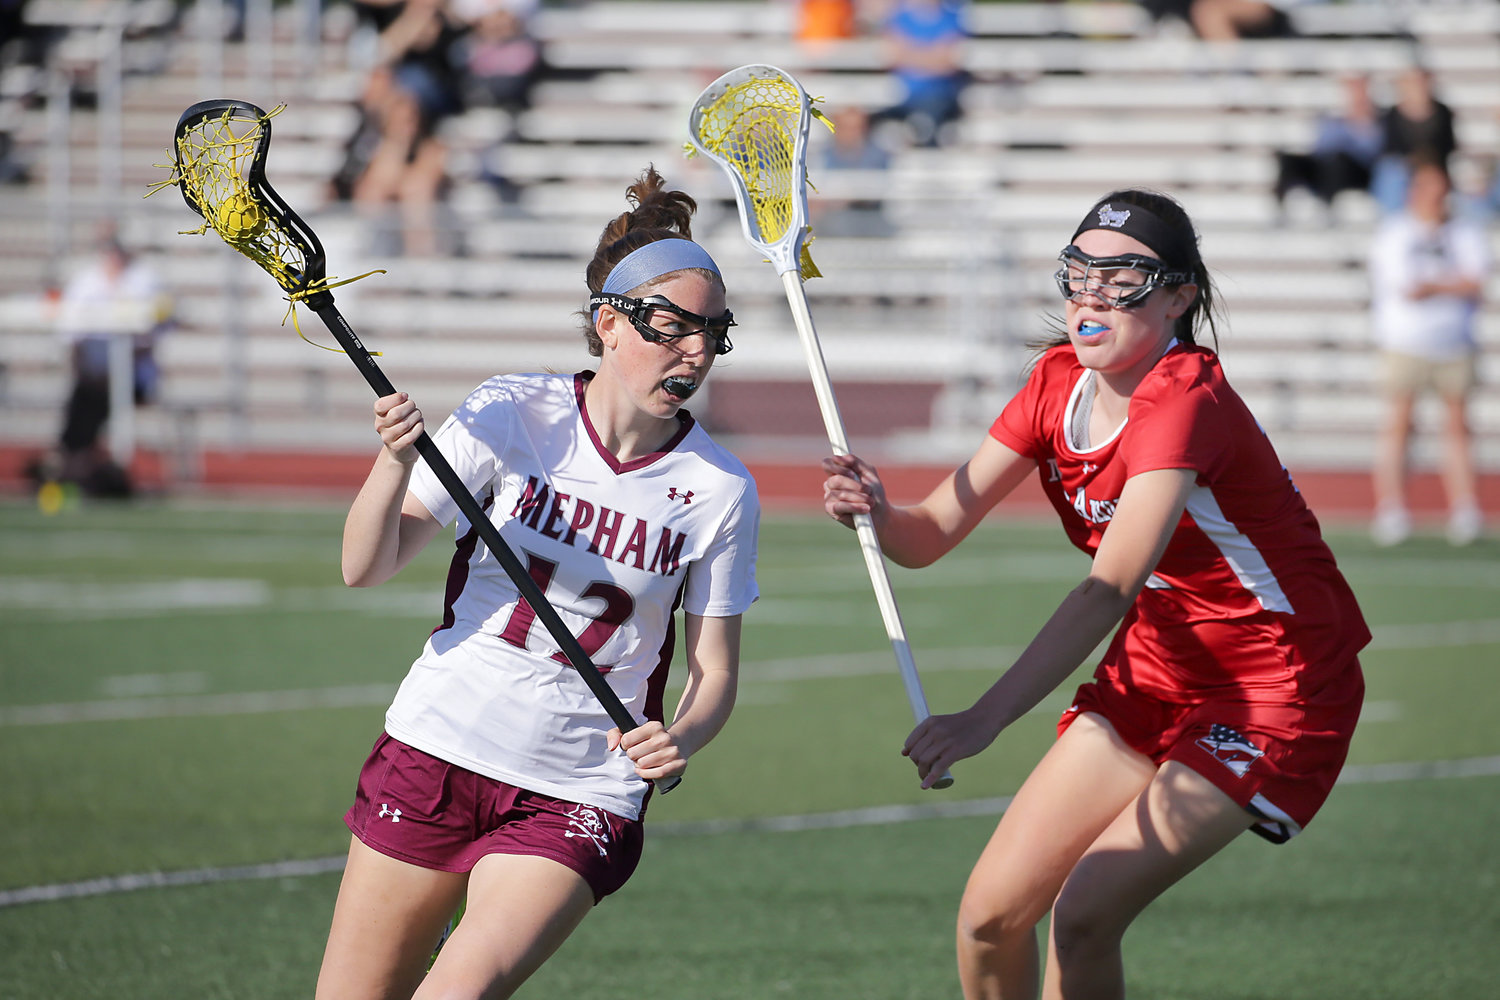 Mepham's Mia McElwee, left, tried to work around MacArthur's Eve Larkin during Wednesday's Class B playoff game.